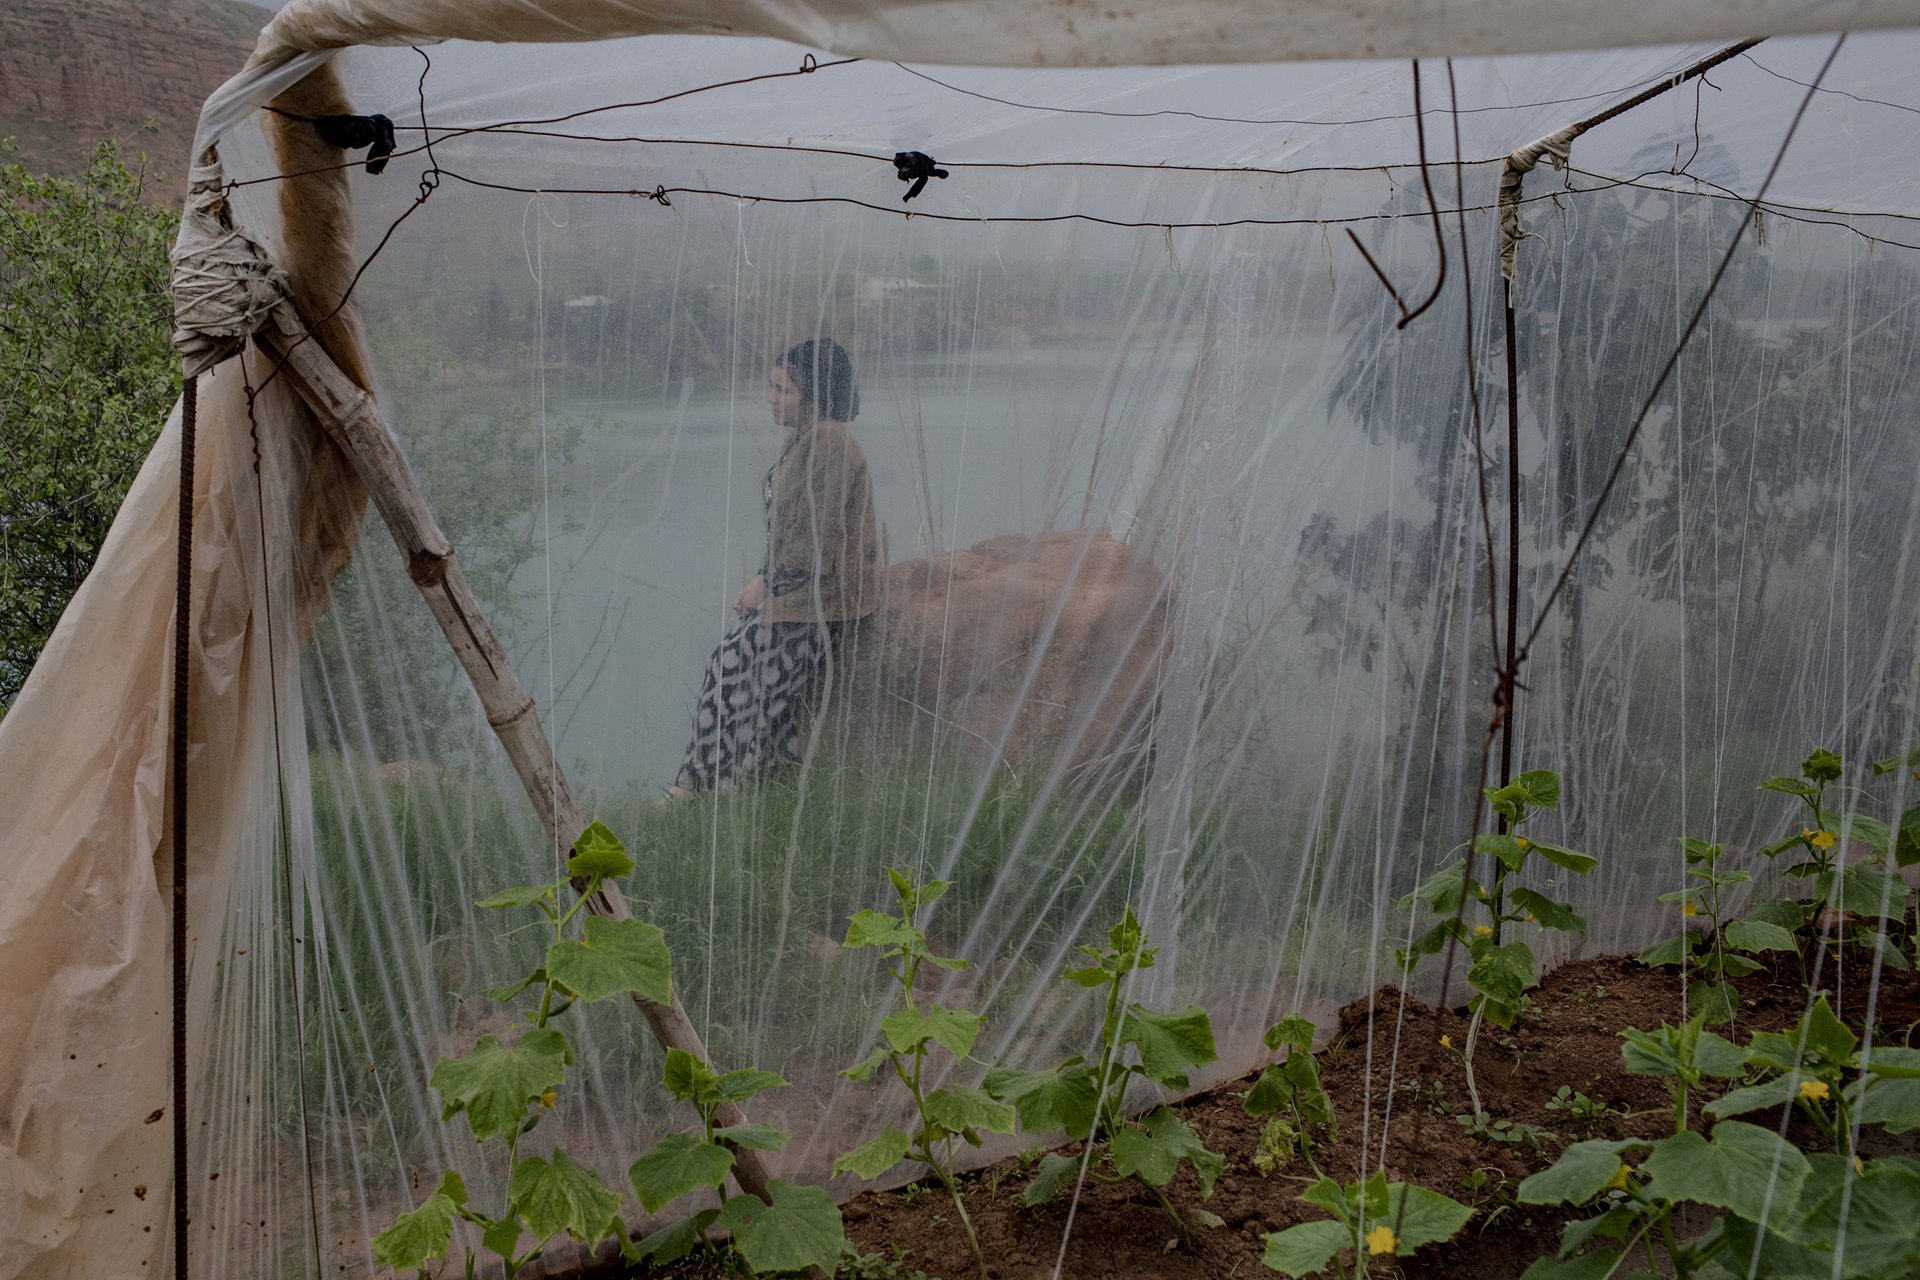 An inhabitant of the village Istiqlol, Tajikistan, rests beside her greenhouse on the River Vakhsh, a tributary of the Amu Darya. She uses river water to irrigate her cucumbers.